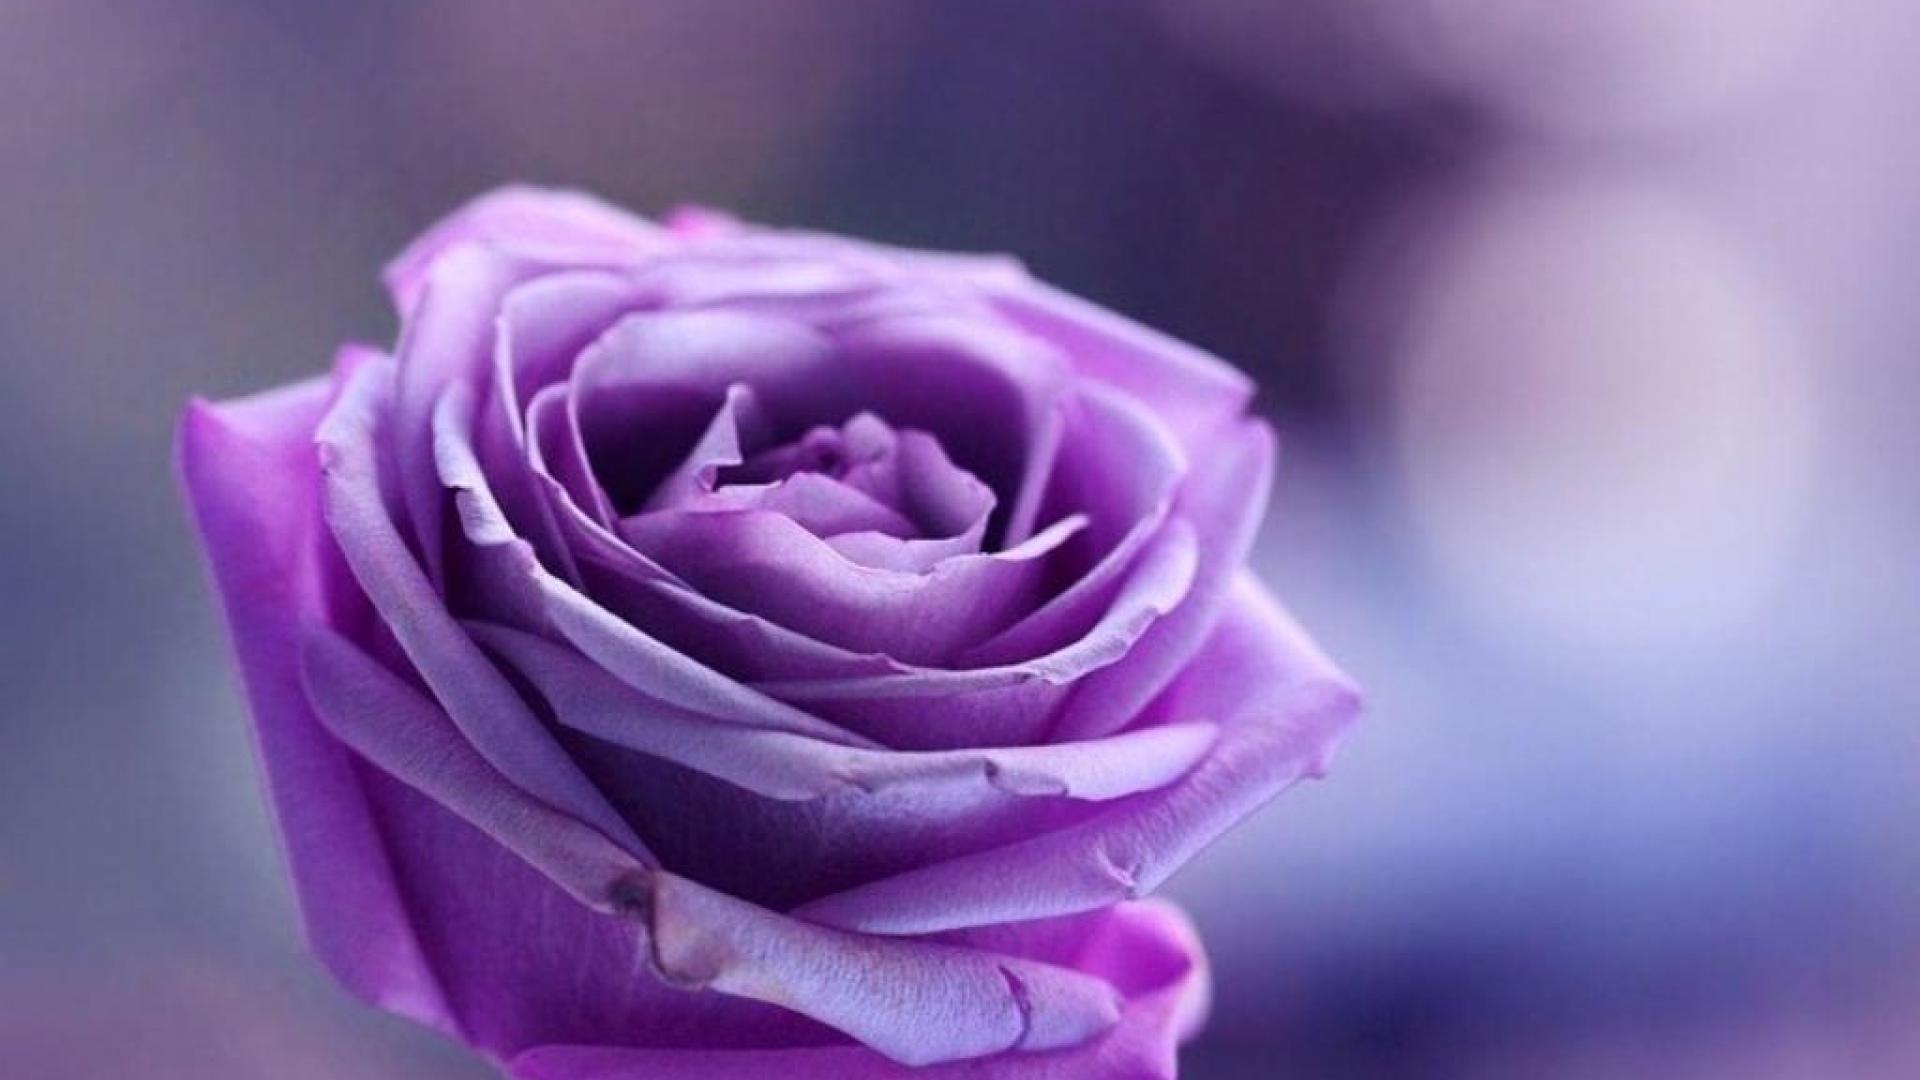 Purple rose on purple background wallpaper and image